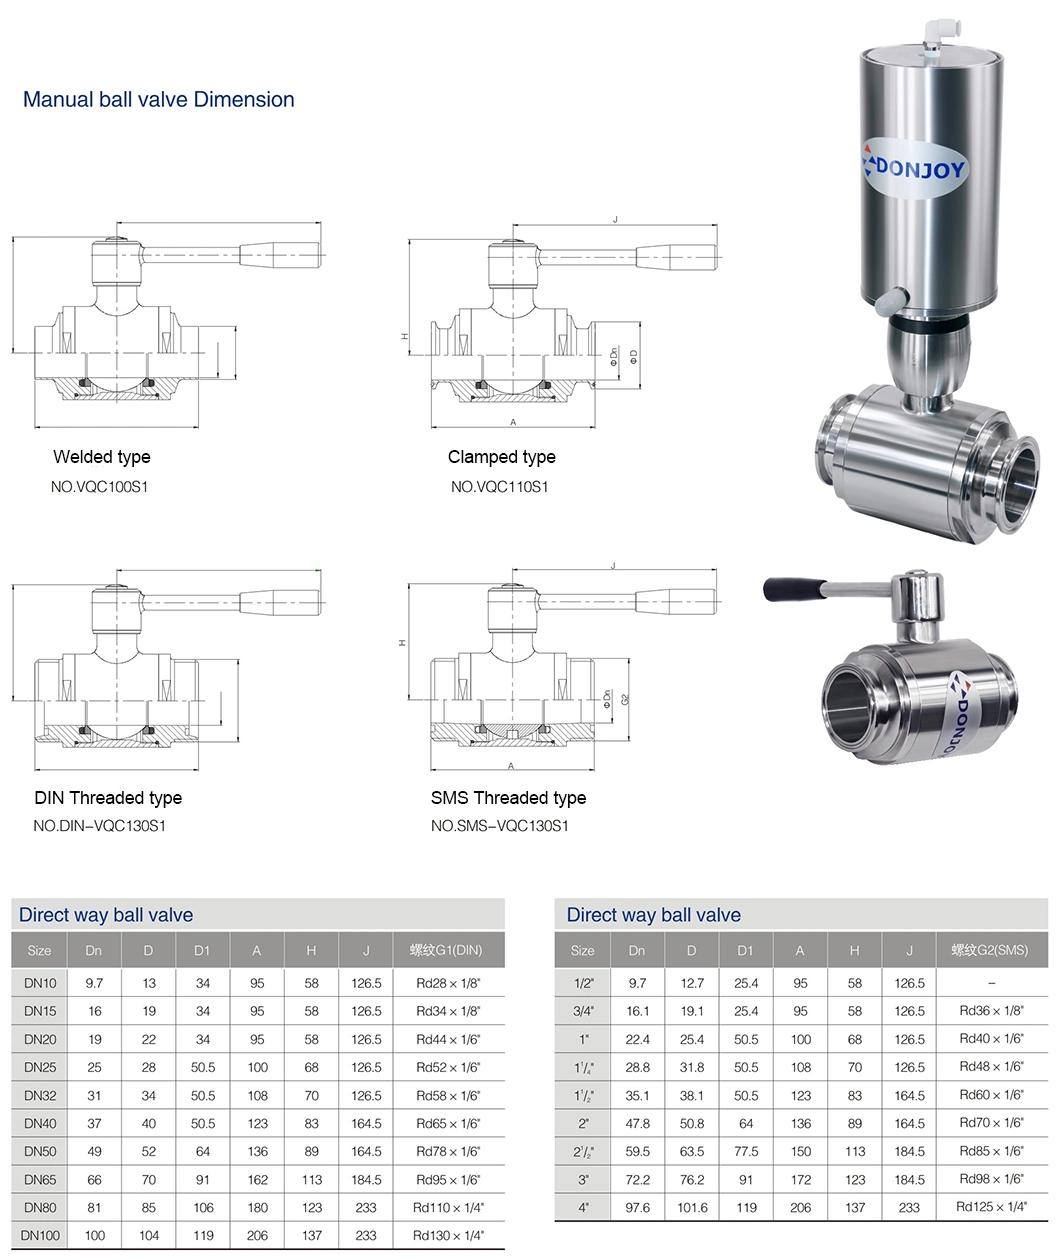 Donjoy Hygienic 3-Way Ball Valve with Handle